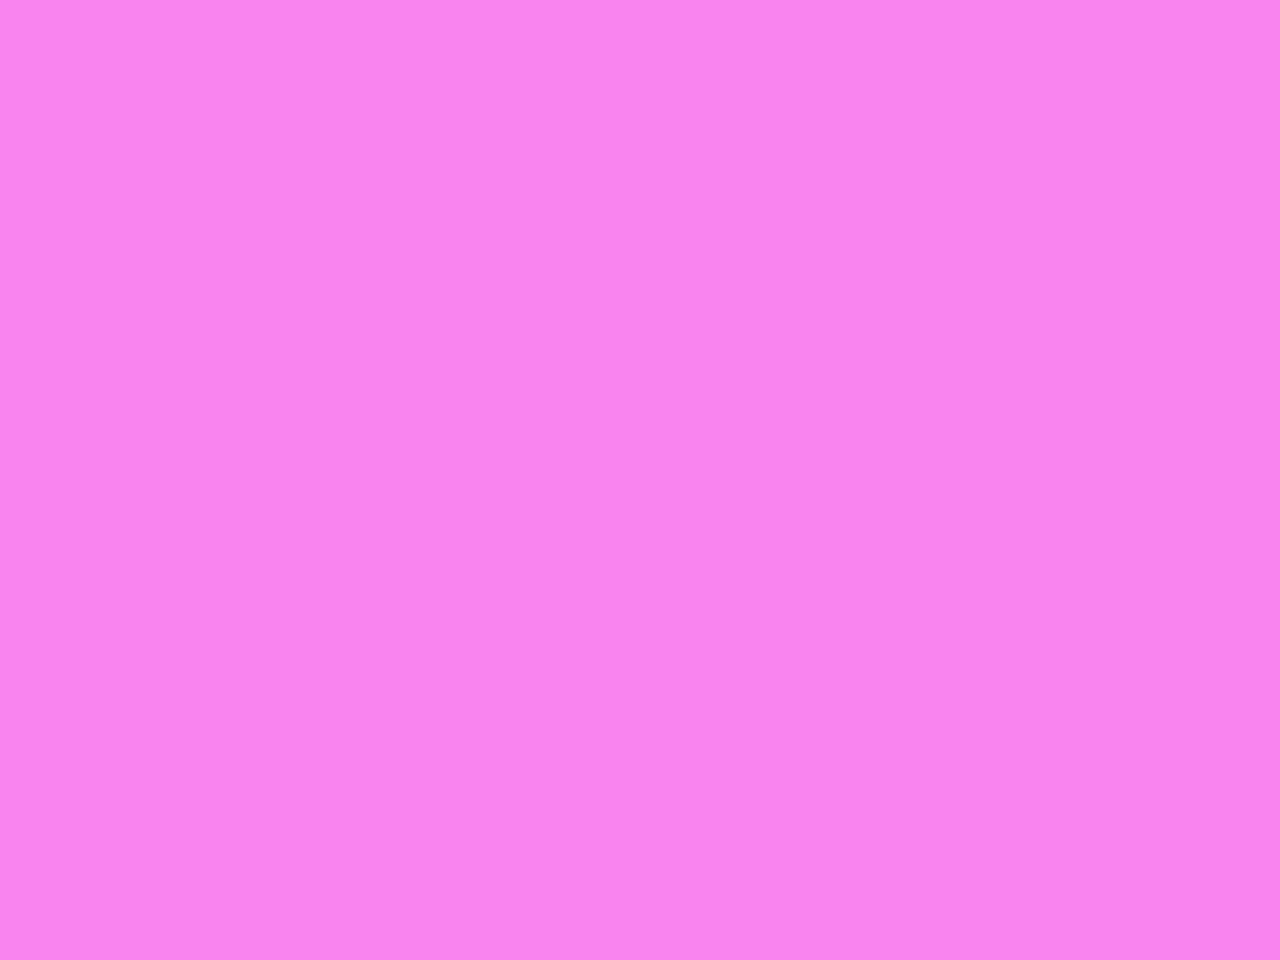 1280x960 Light Fuchsia Pink Solid Color Background